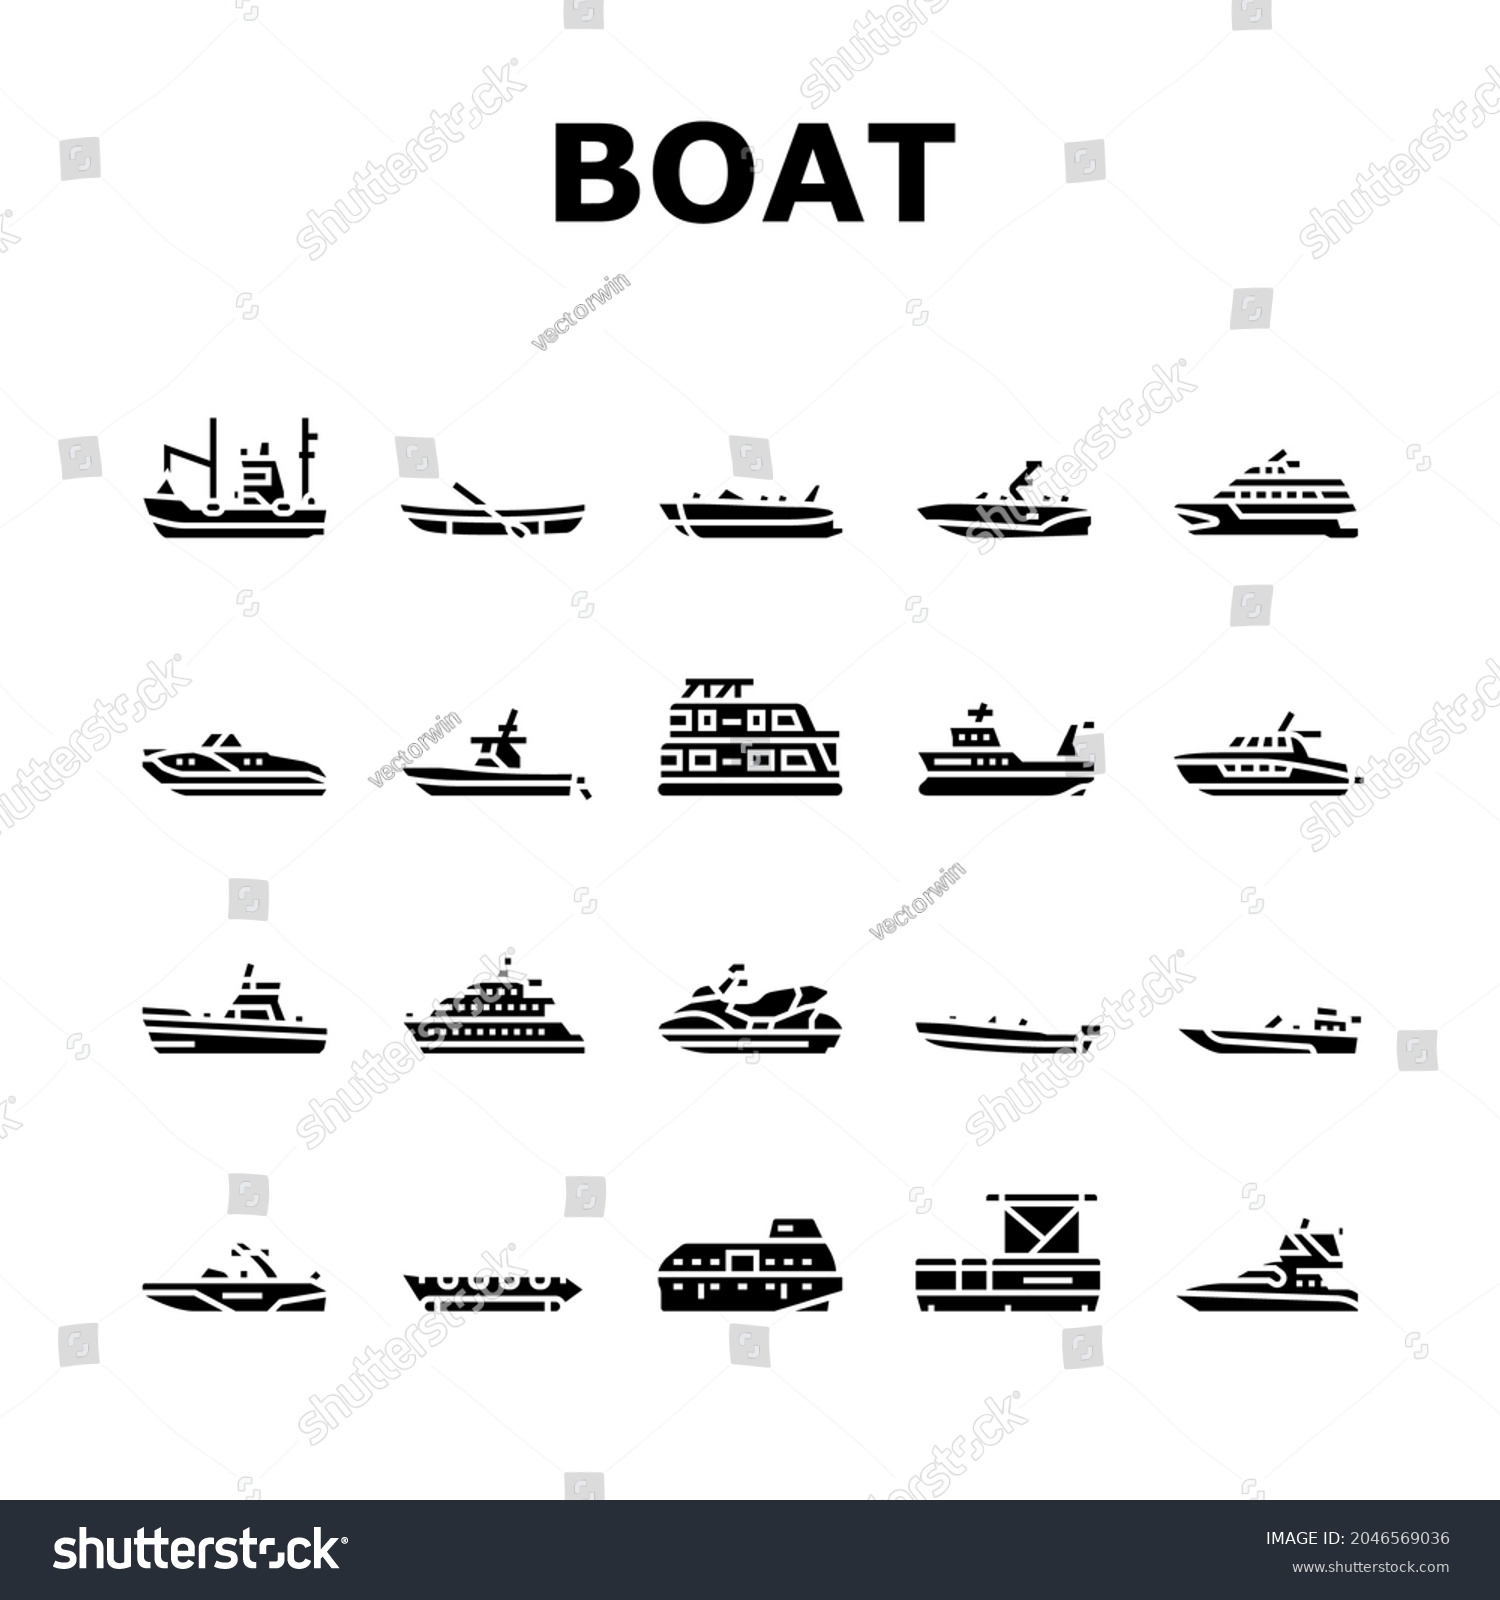 SVG of Boat Water Transportation Types Icons Set Vector. Runabout And Catamaran, Fishing And Bowrider, Motor Yacht And Cabin Cruiser Boat Line. Ship Motorboat Transport Glyph Pictograms Black Illustrations svg